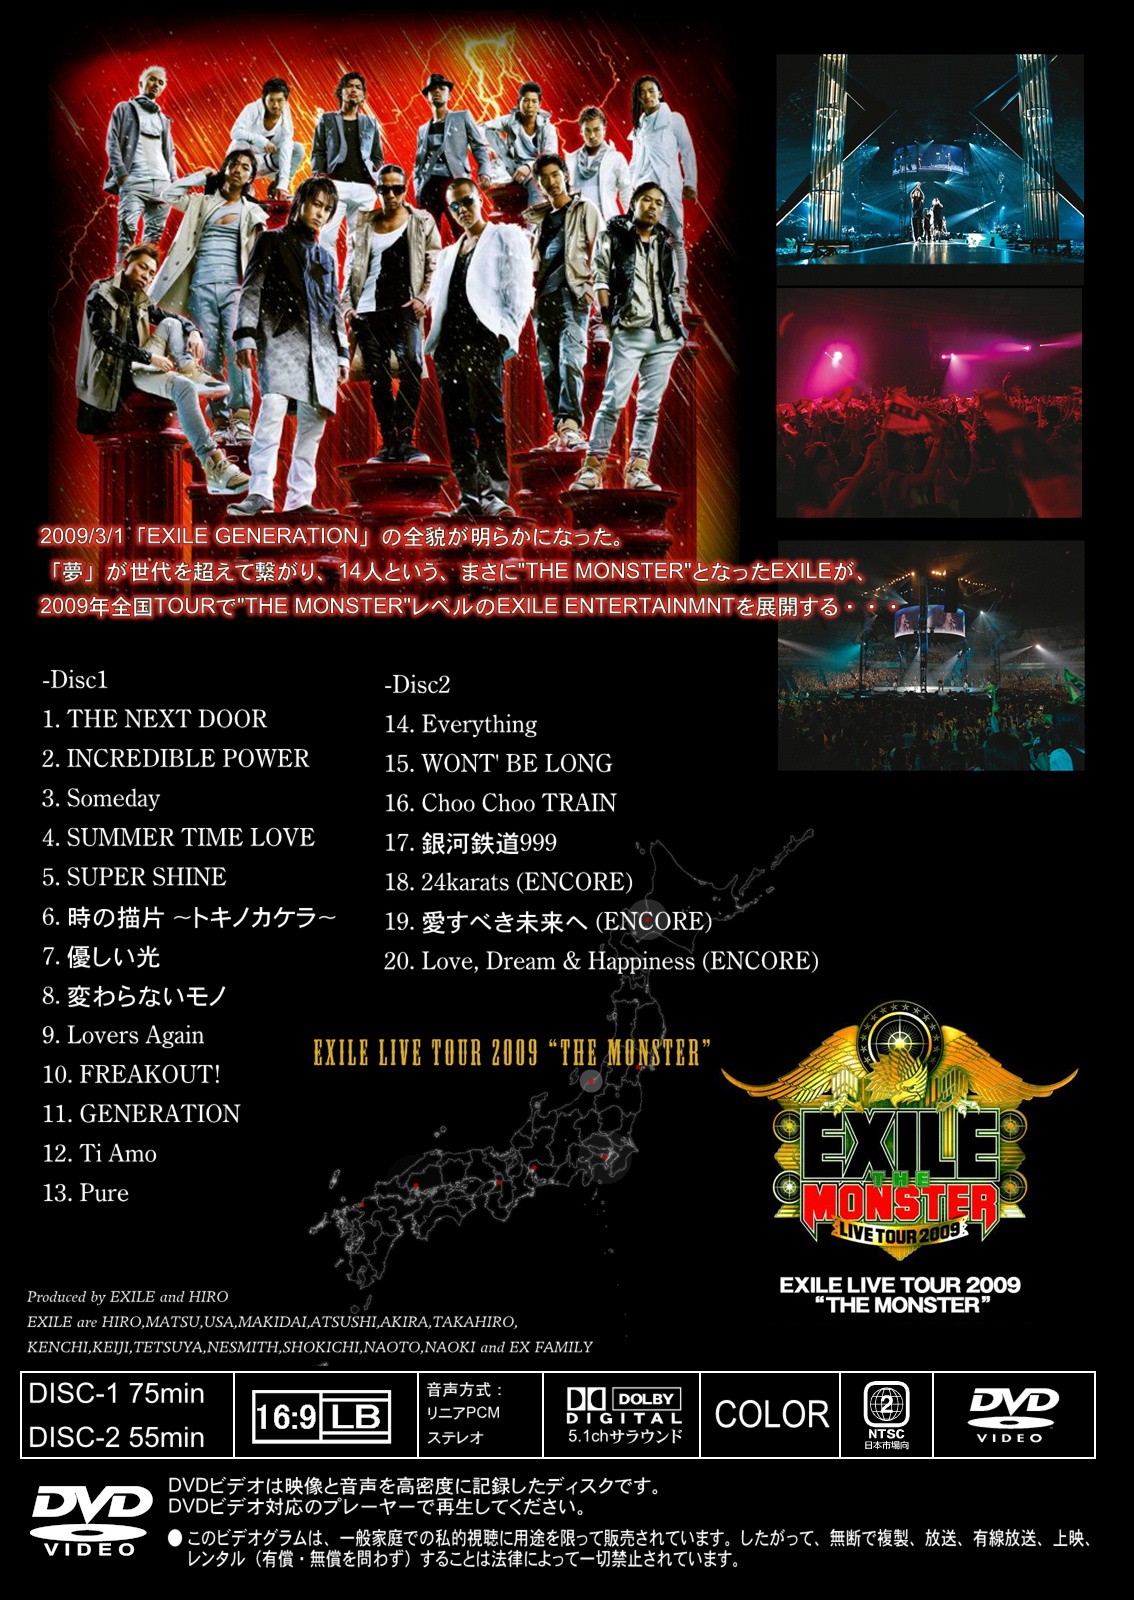 EXILE - EXILE LIVE TOUR 2009 THE MONSTER ジャケット - 自己れ～べる